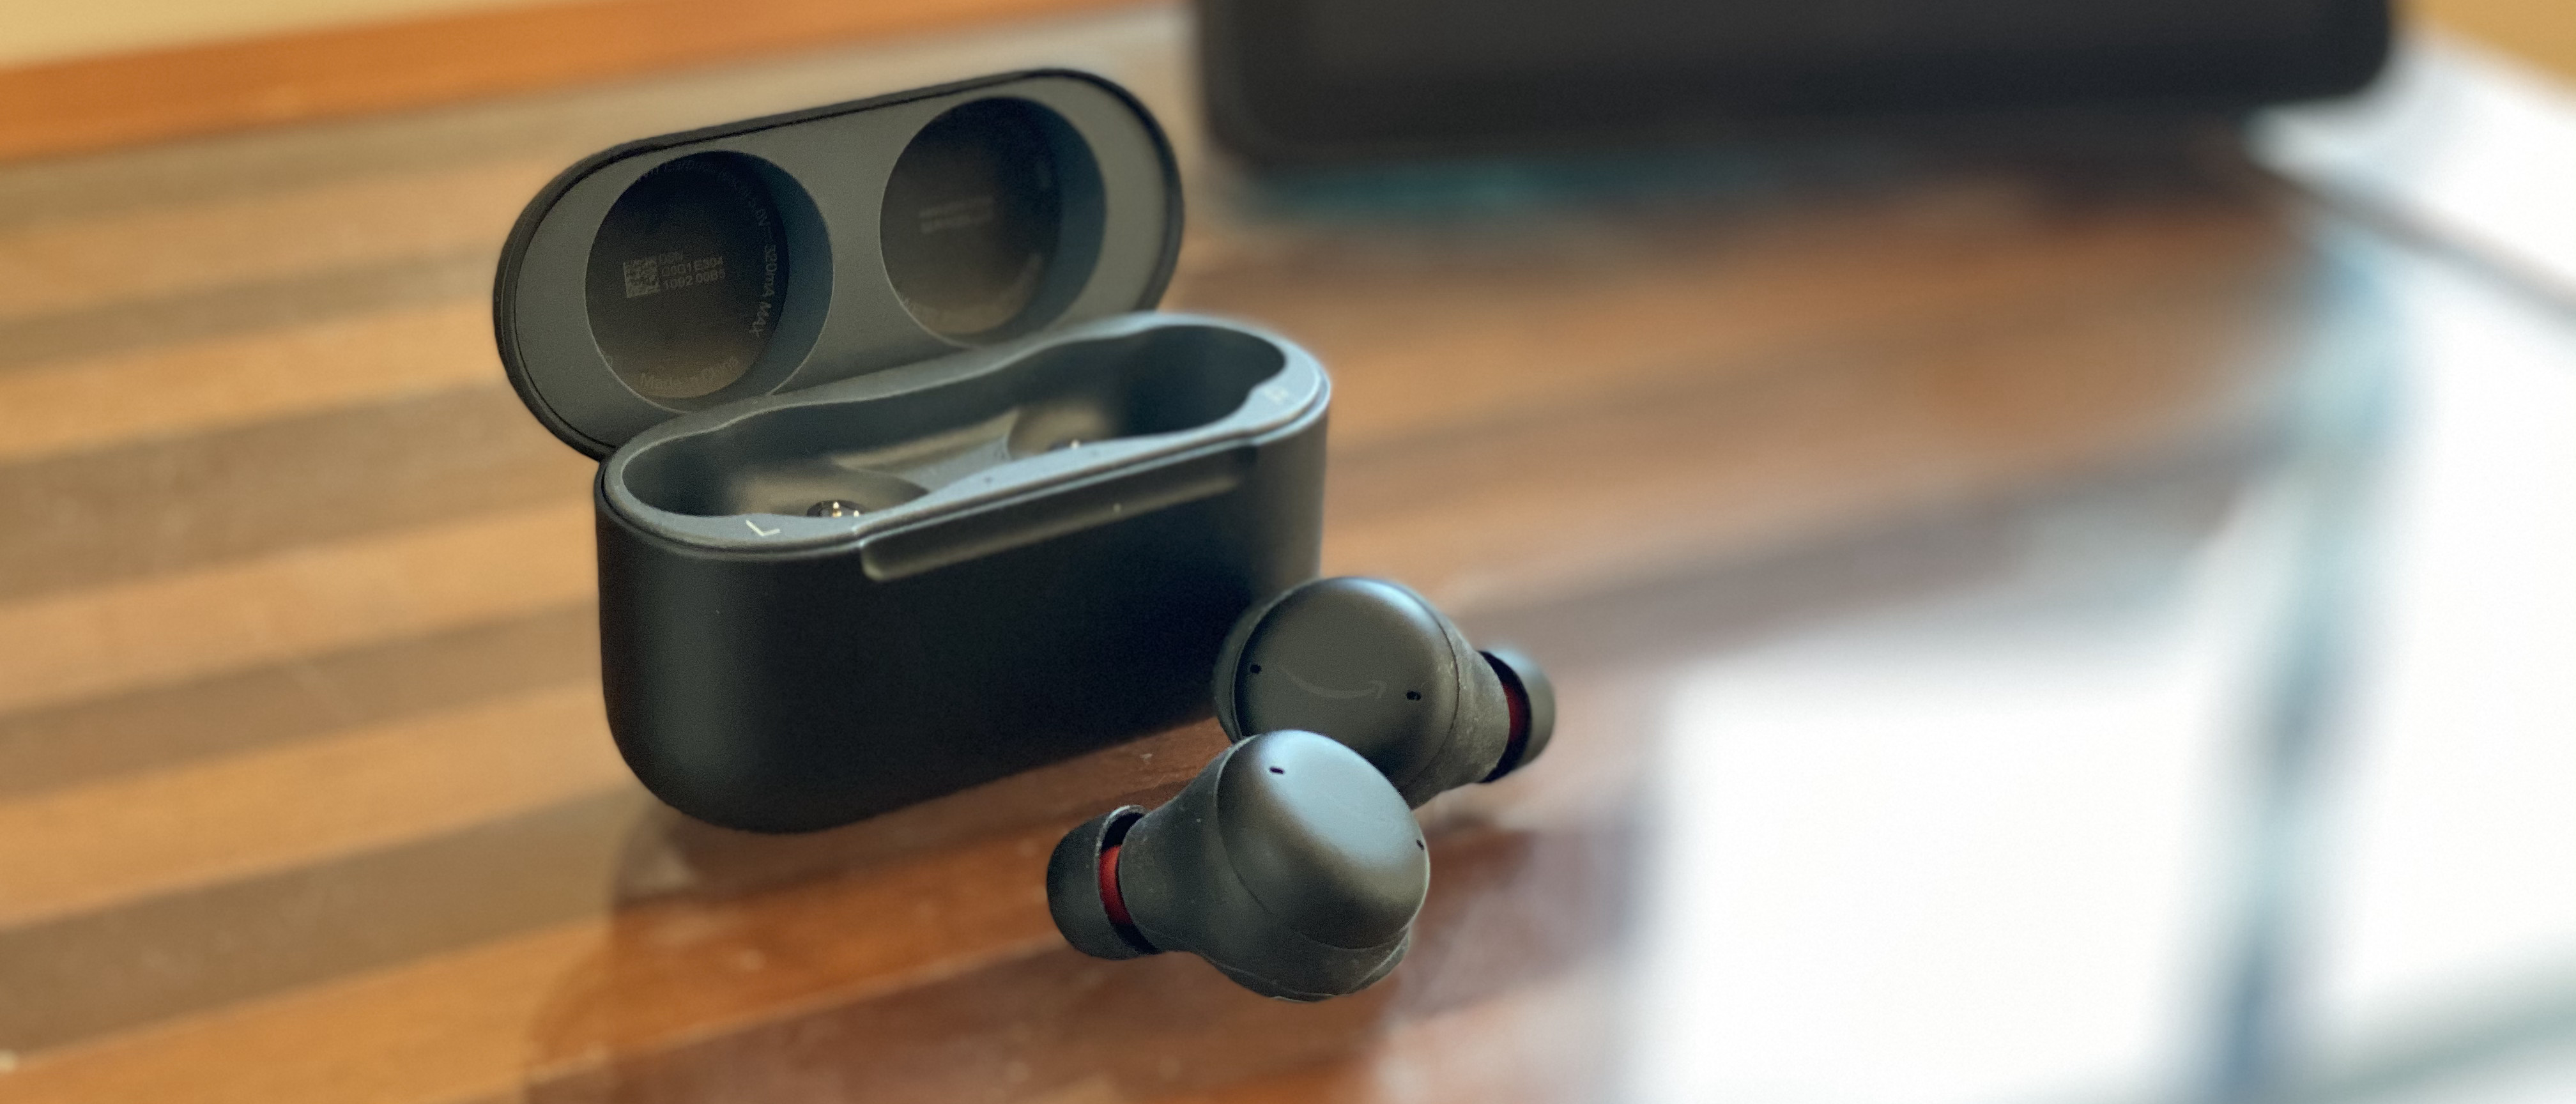 Echo Buds (2nd Gen) Wireless earbuds with active noise cancellation and  Alexa